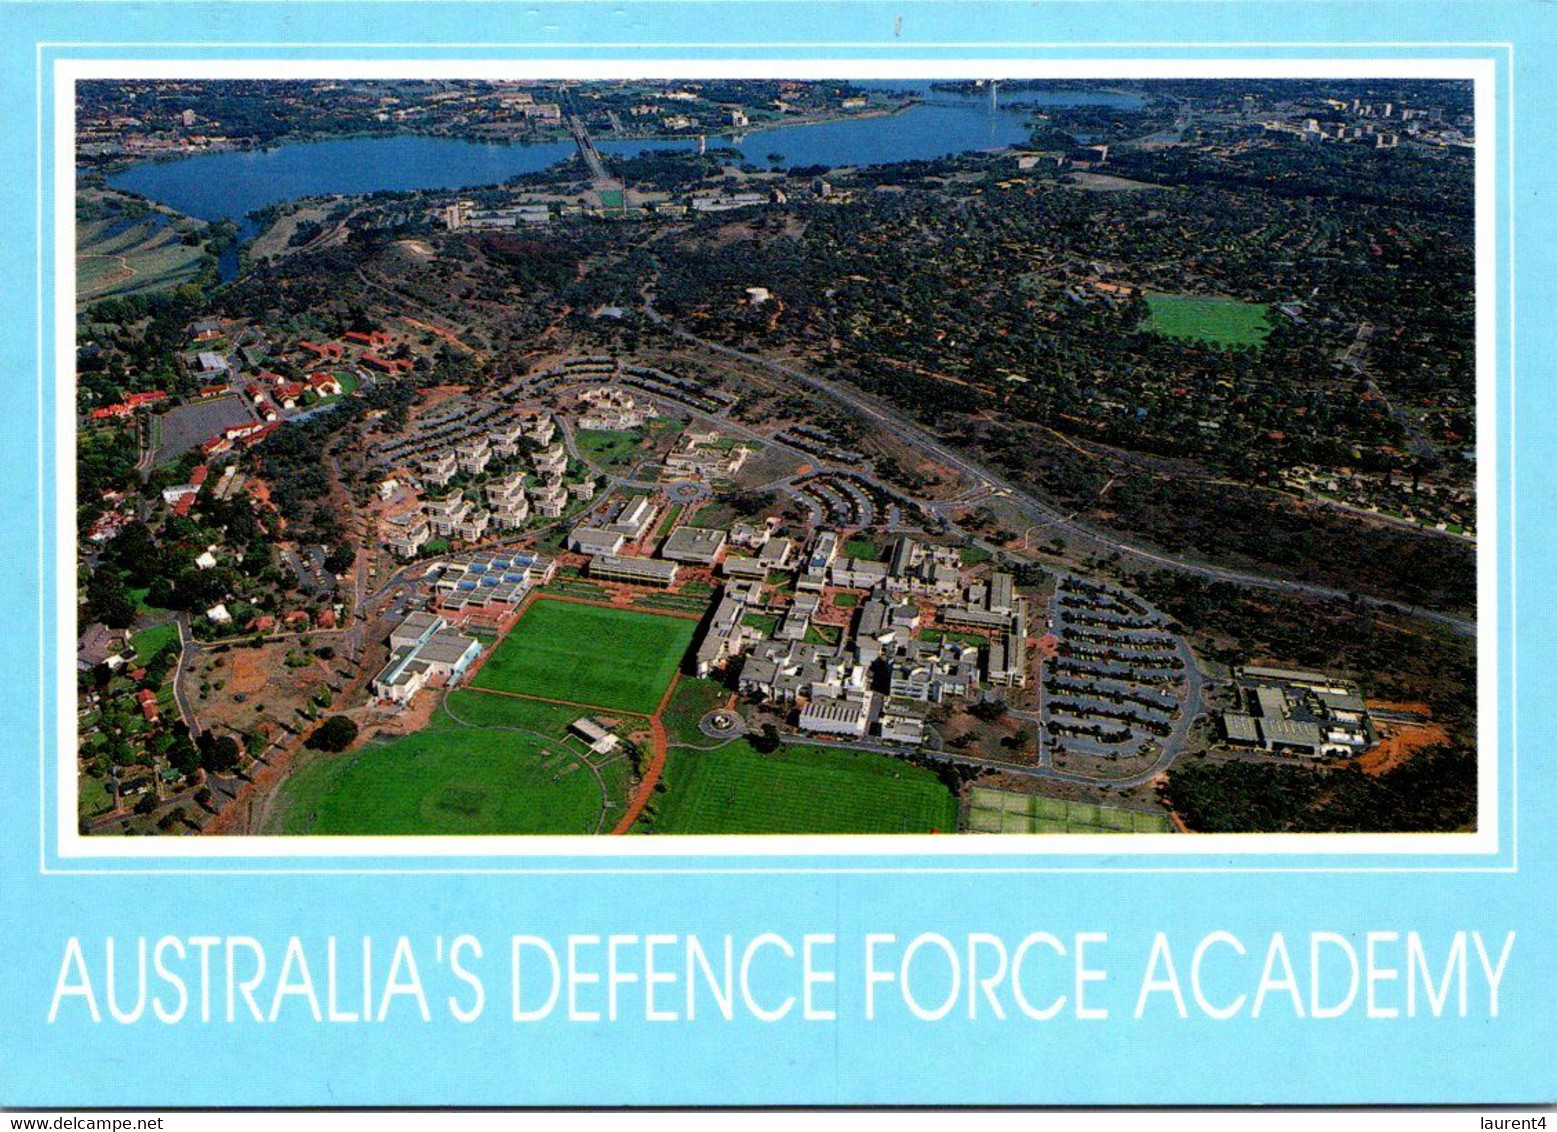 (4 N 31) Australia - ACT - Canberra - Defence Force Academy - Canberra (ACT)